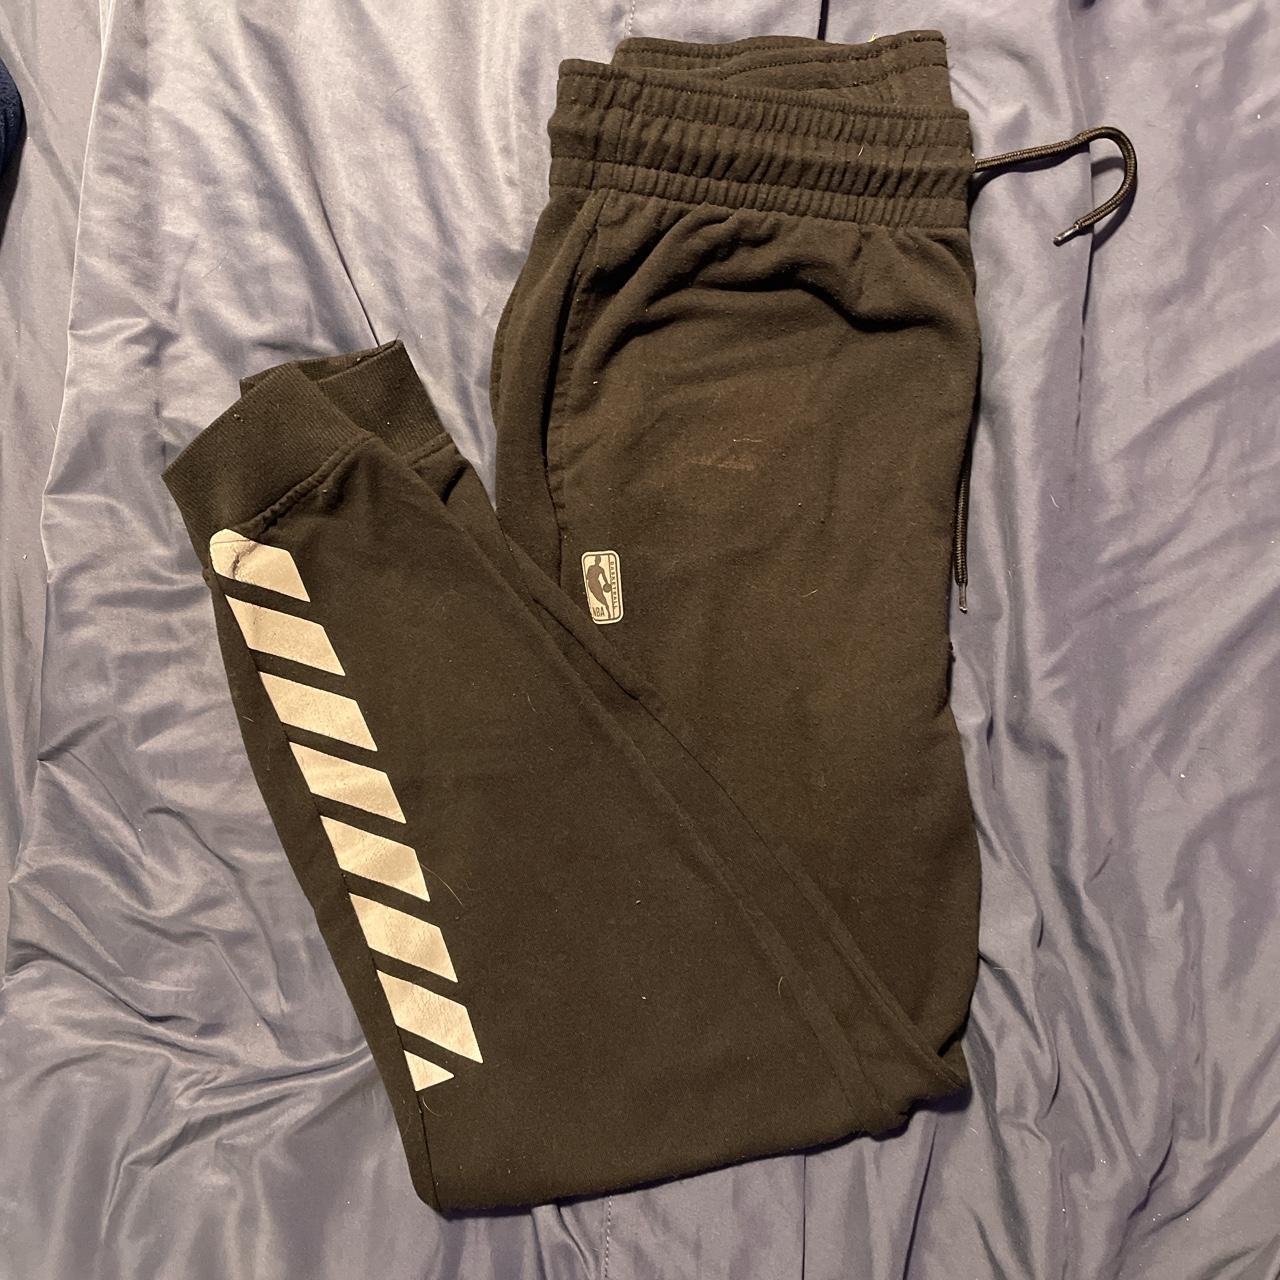 NBA sweatpants in black and gray $18 for both $8 - Depop